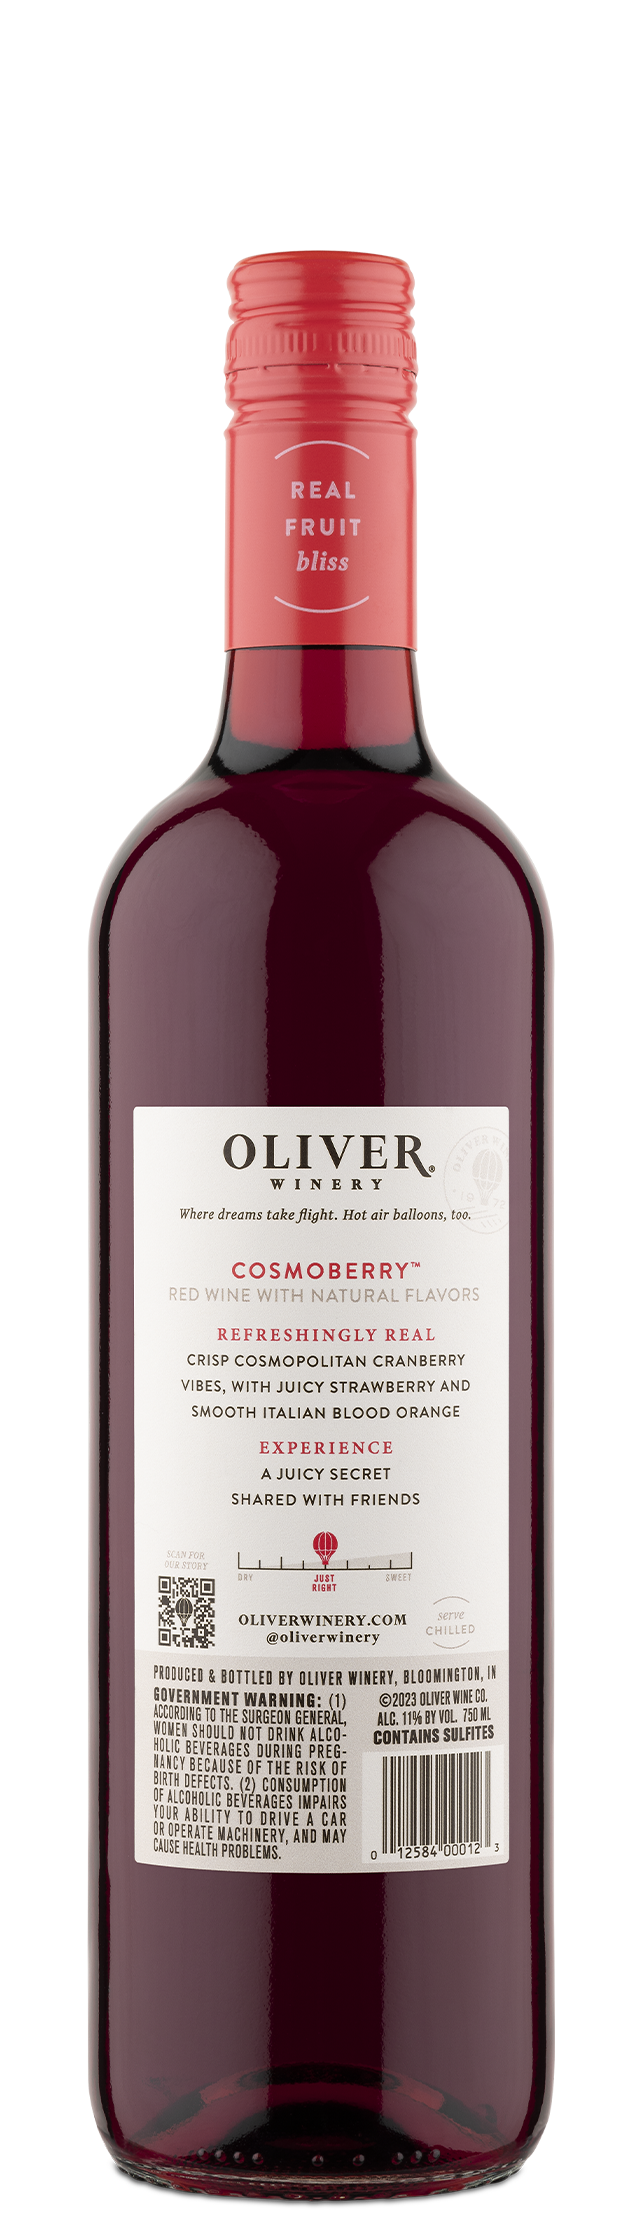 Oliver Cosmoberry - Sweet Red Wine Back Label